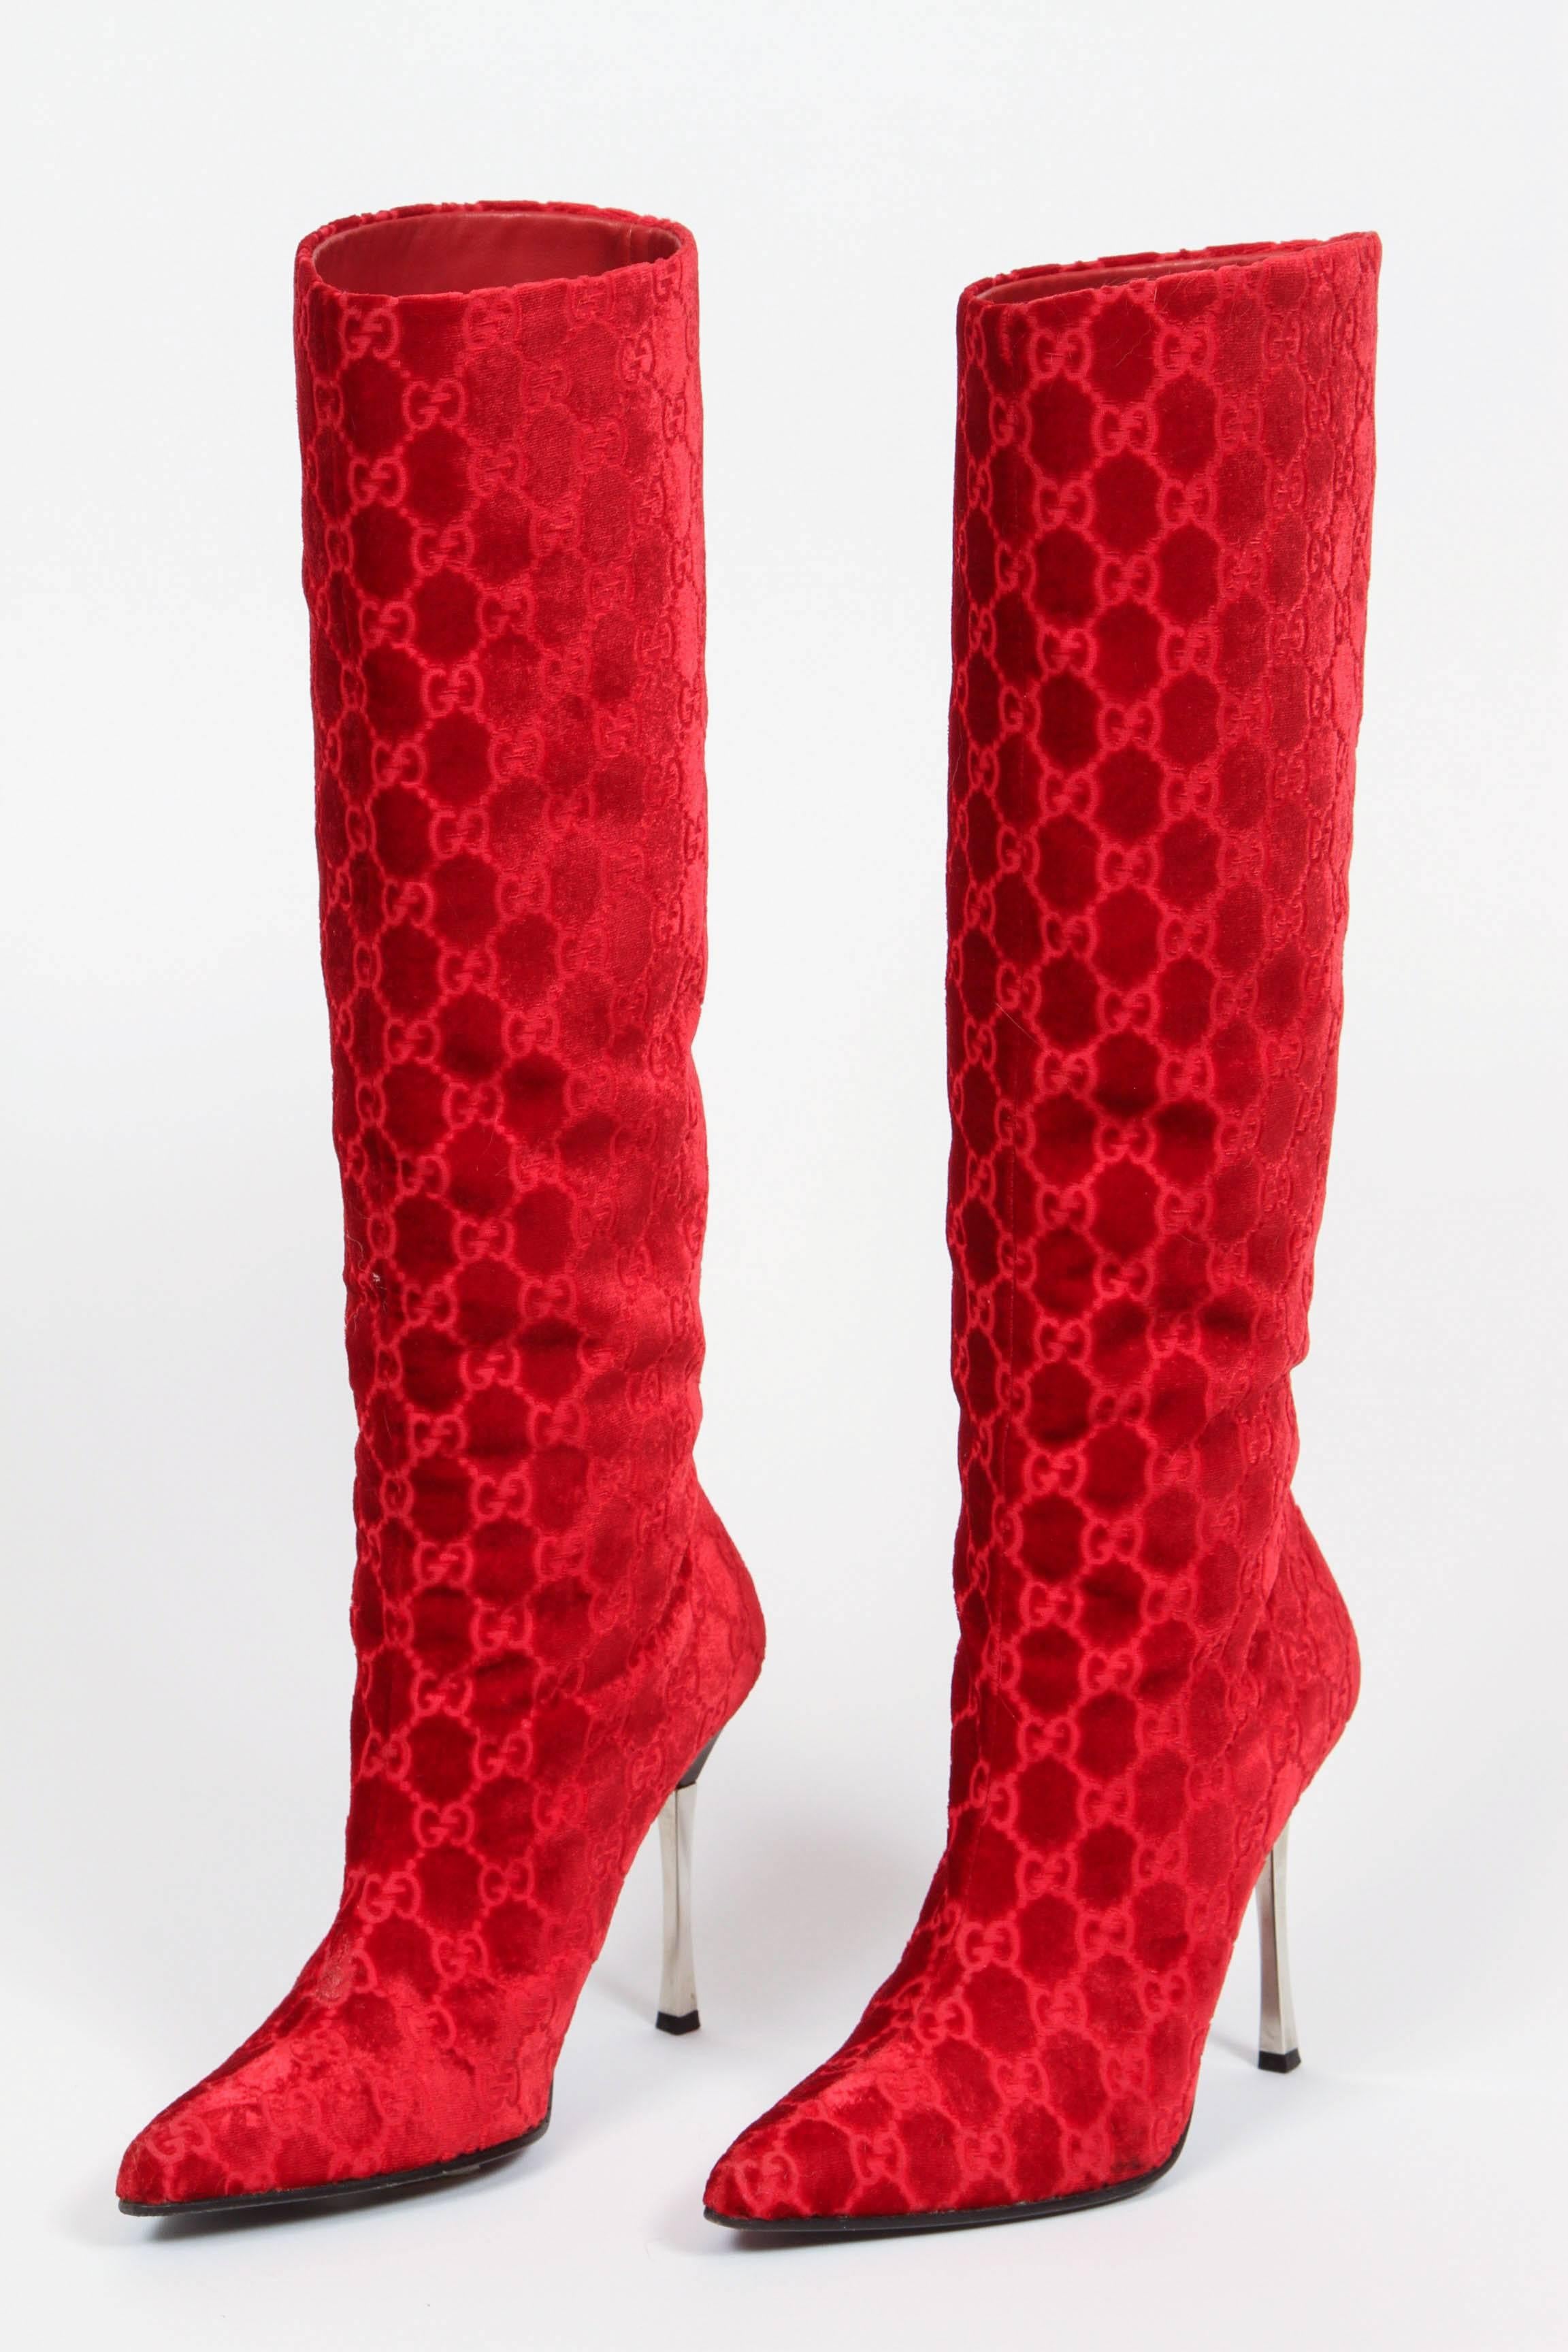 1997 Tom Ford era Gucci bright red brushed velvet pointed-toe boots with 